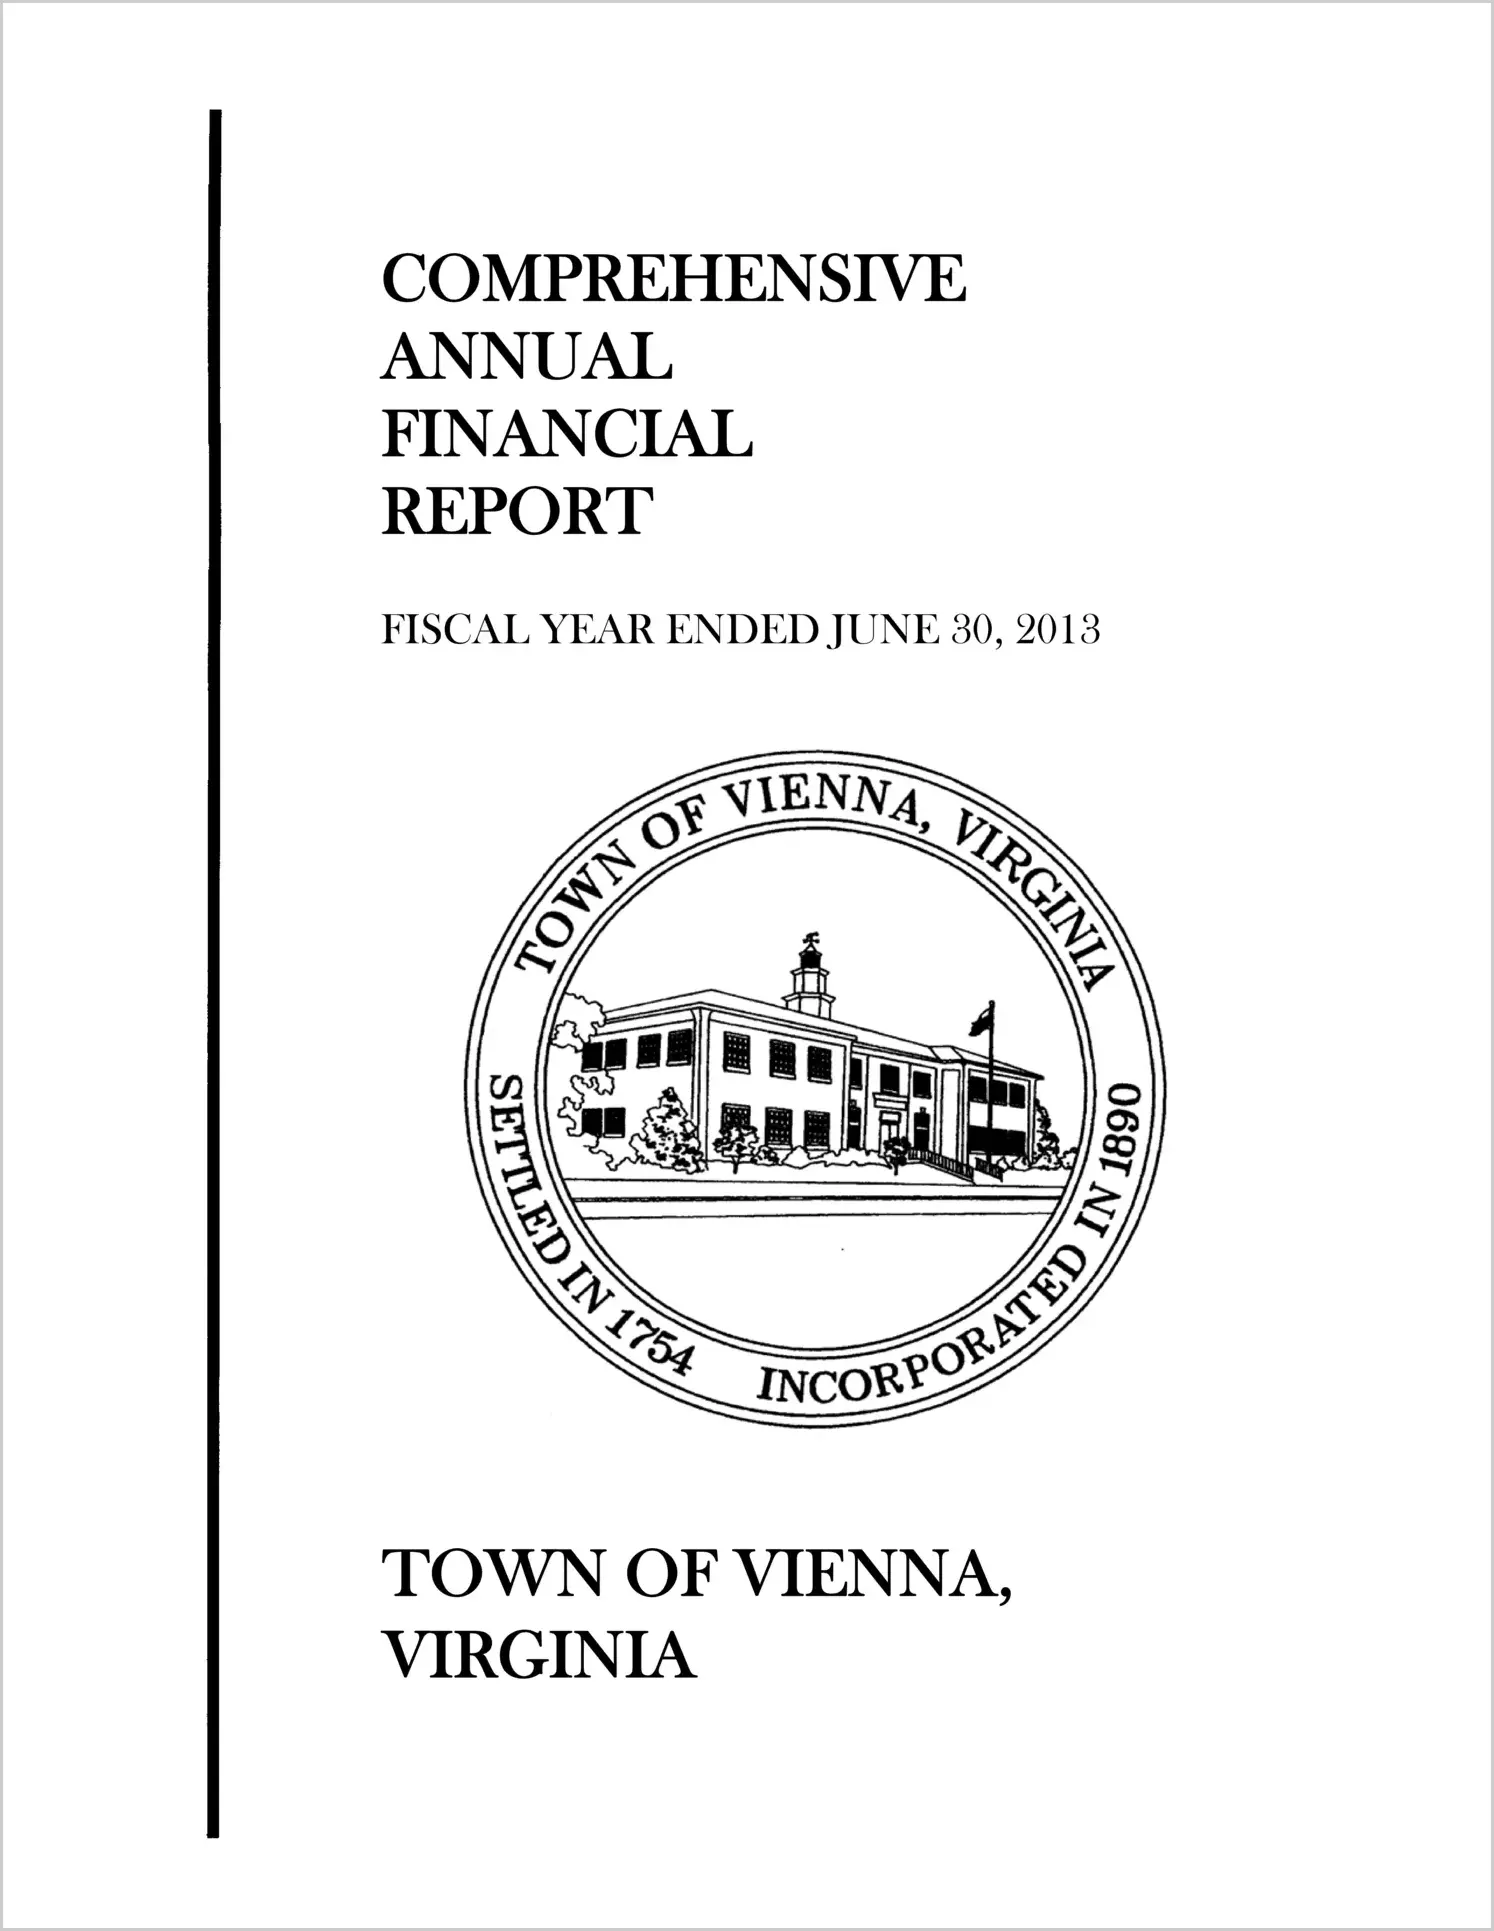 2013 Annual Financial Report for Town of Vienna